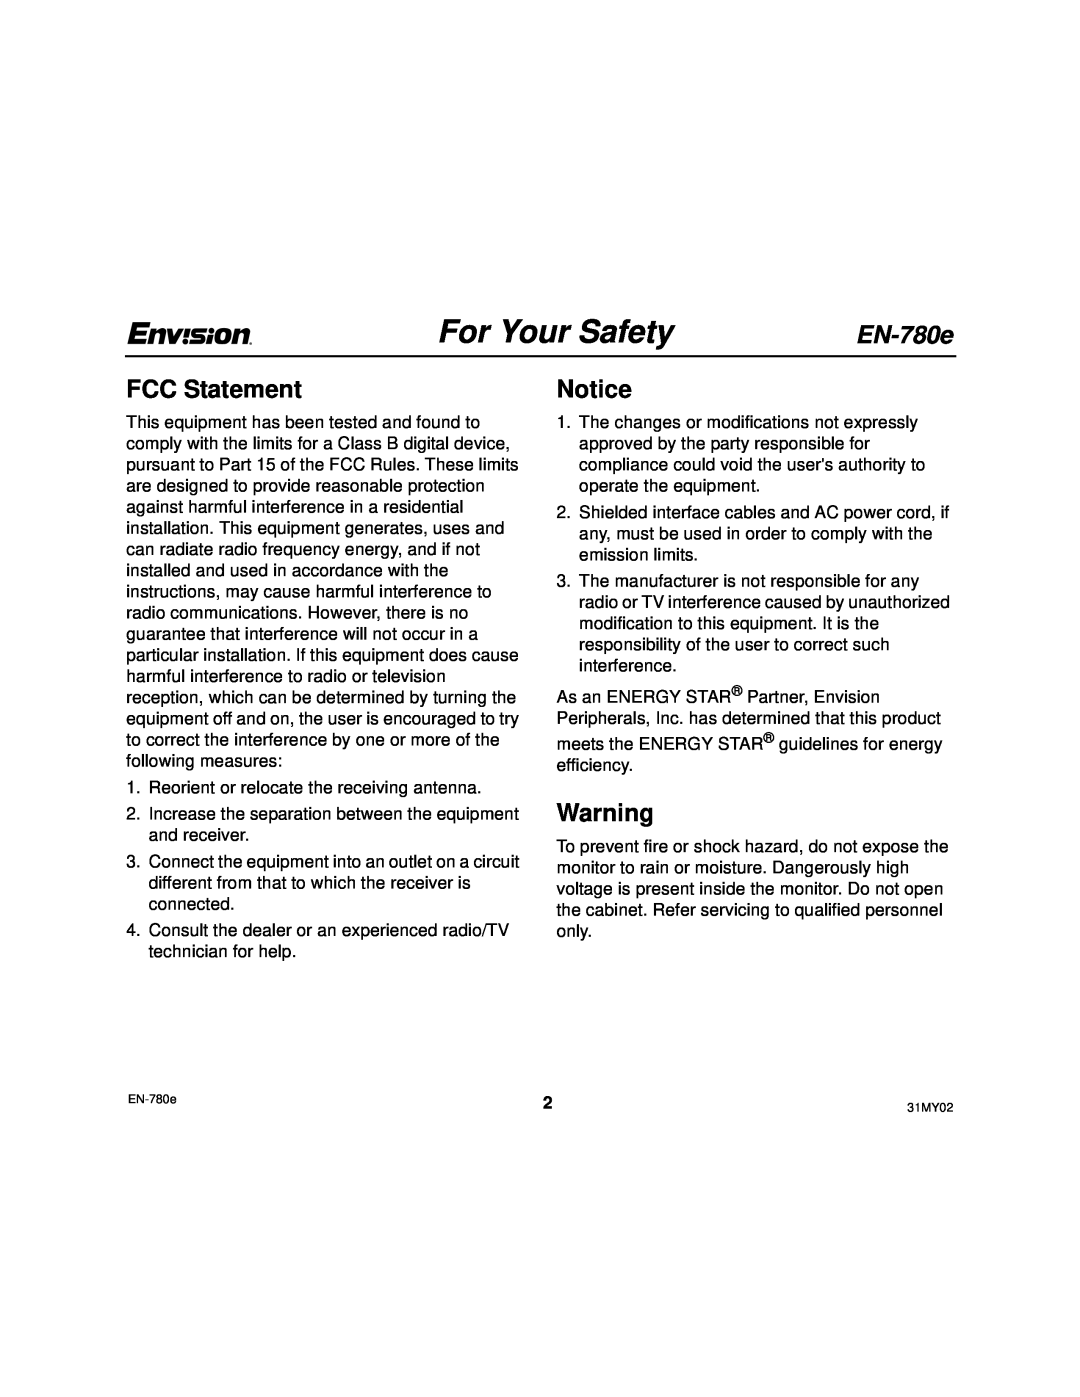 Envision Peripherals EN-780e user manual For Your Safety, FCC Statement 